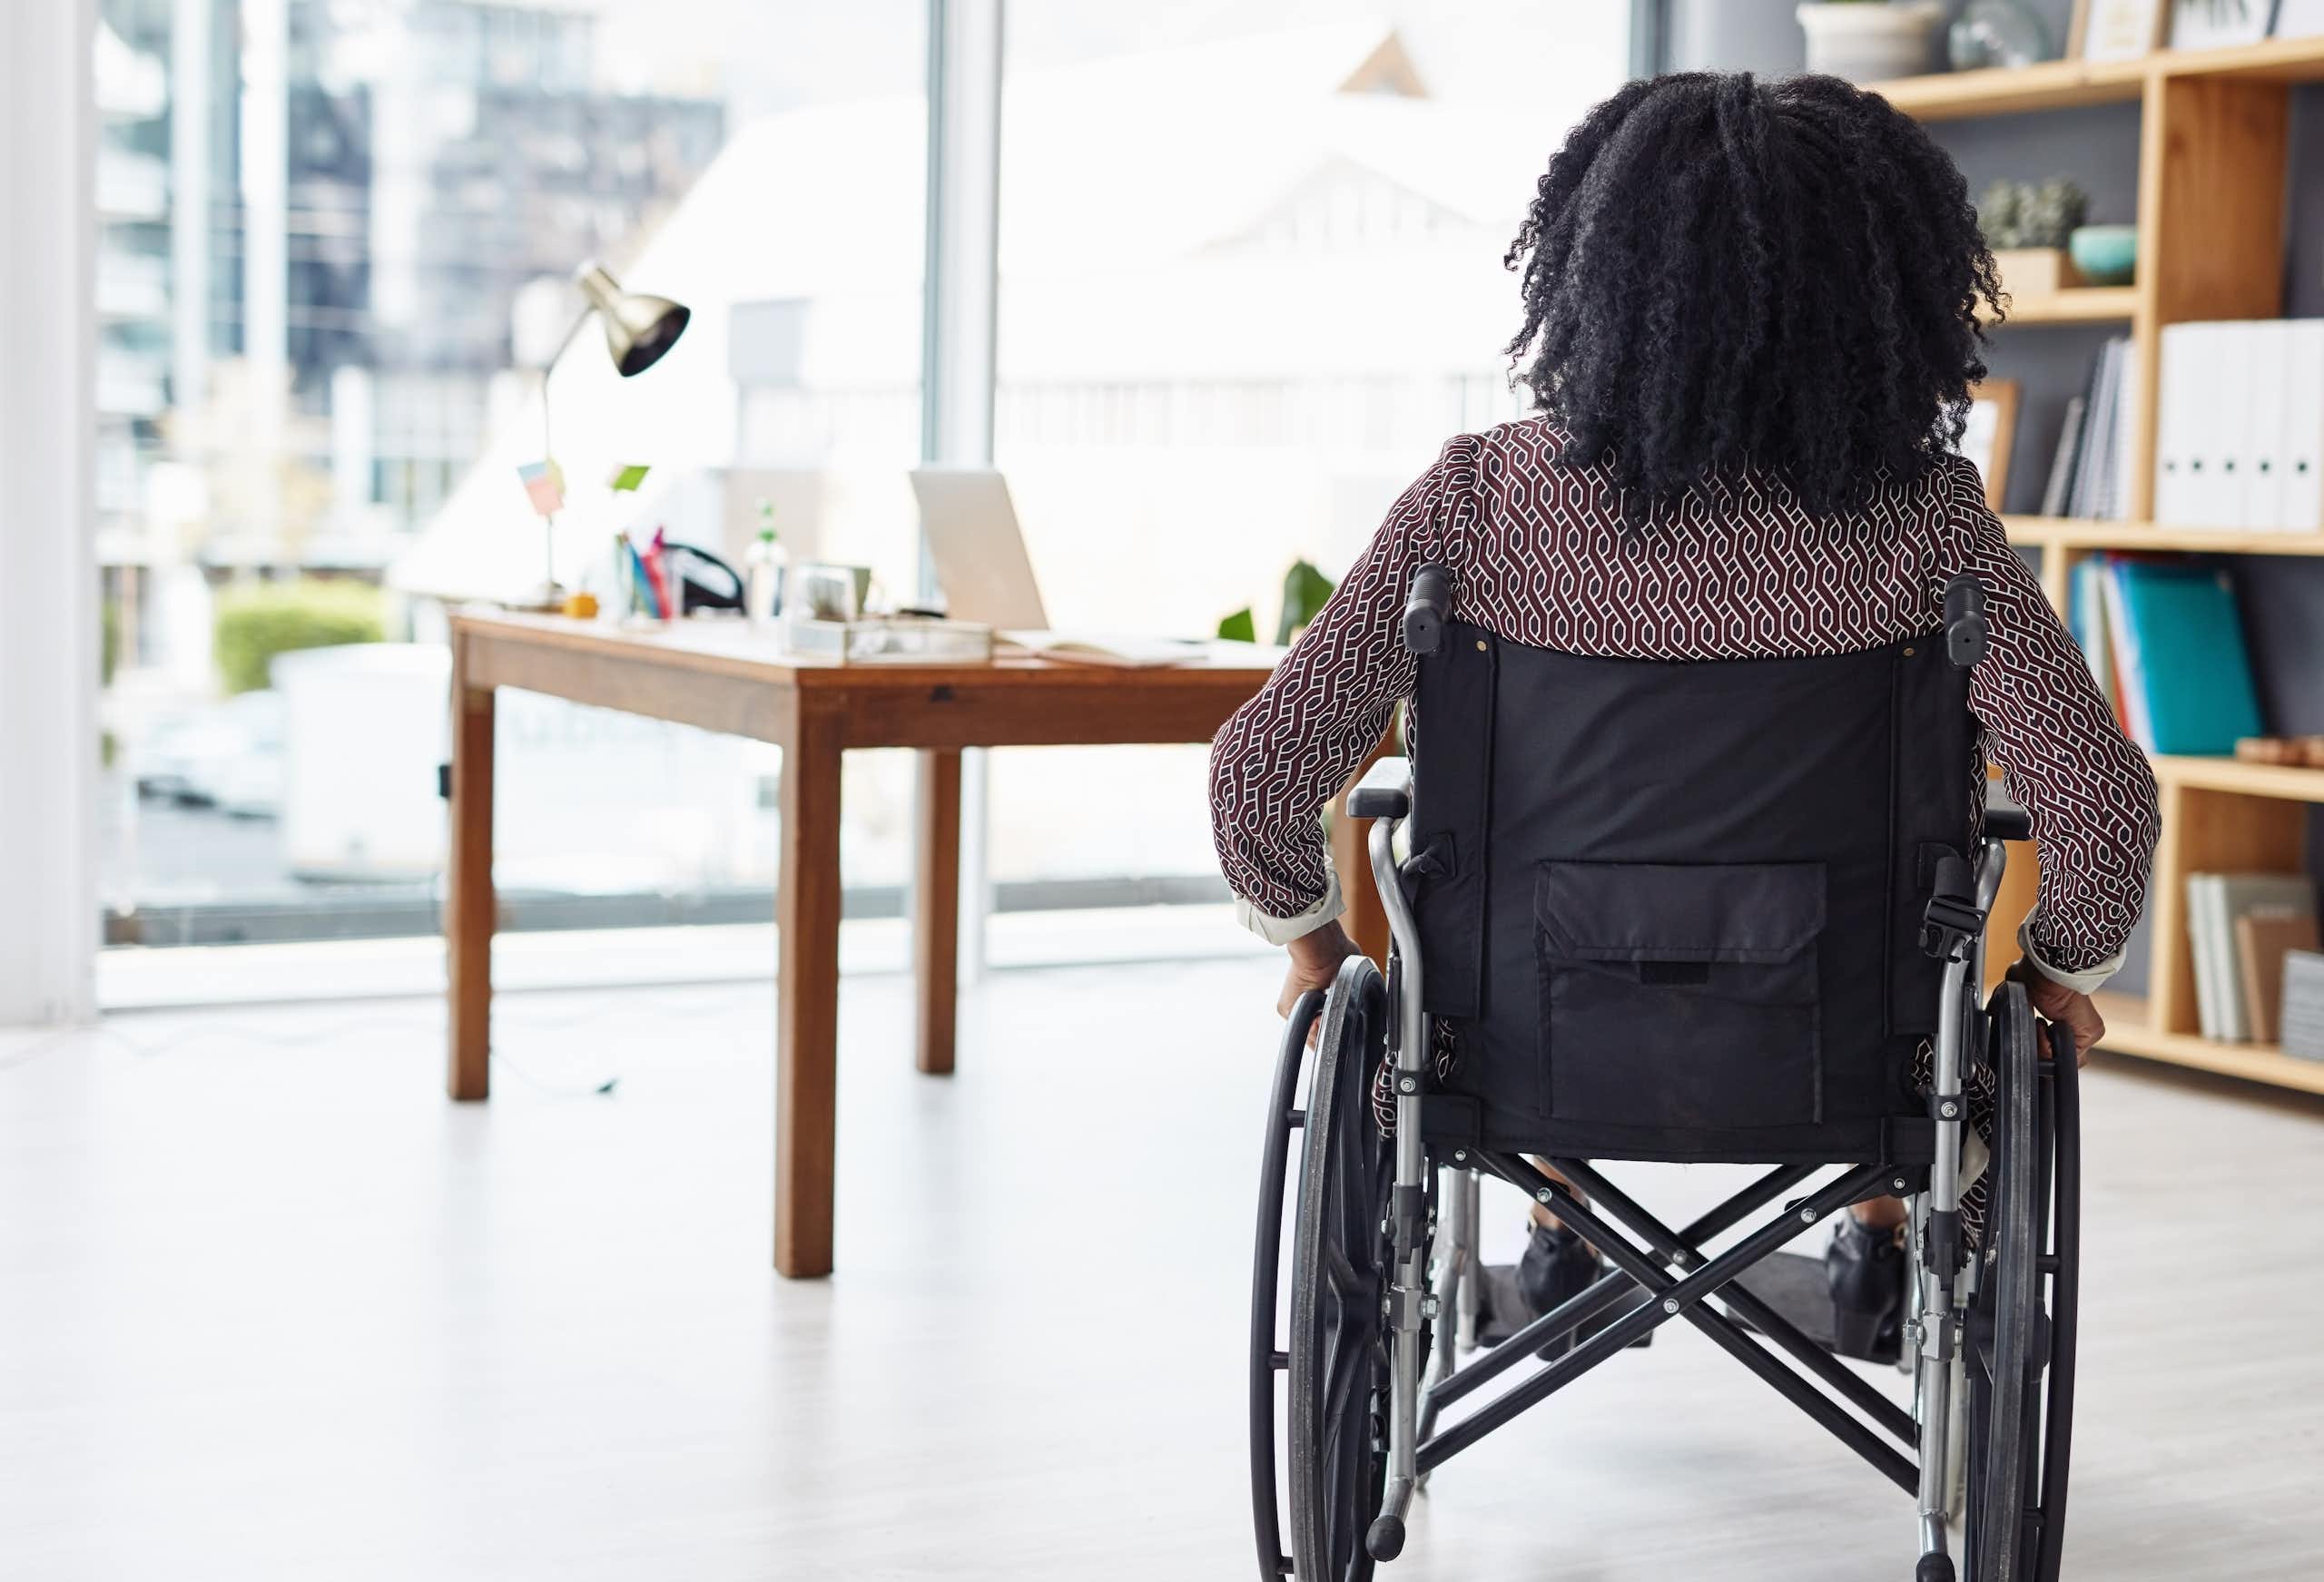 Rearview photo of a woman sitting in her wheelchair, in an office with bookshelves and a desk in the background